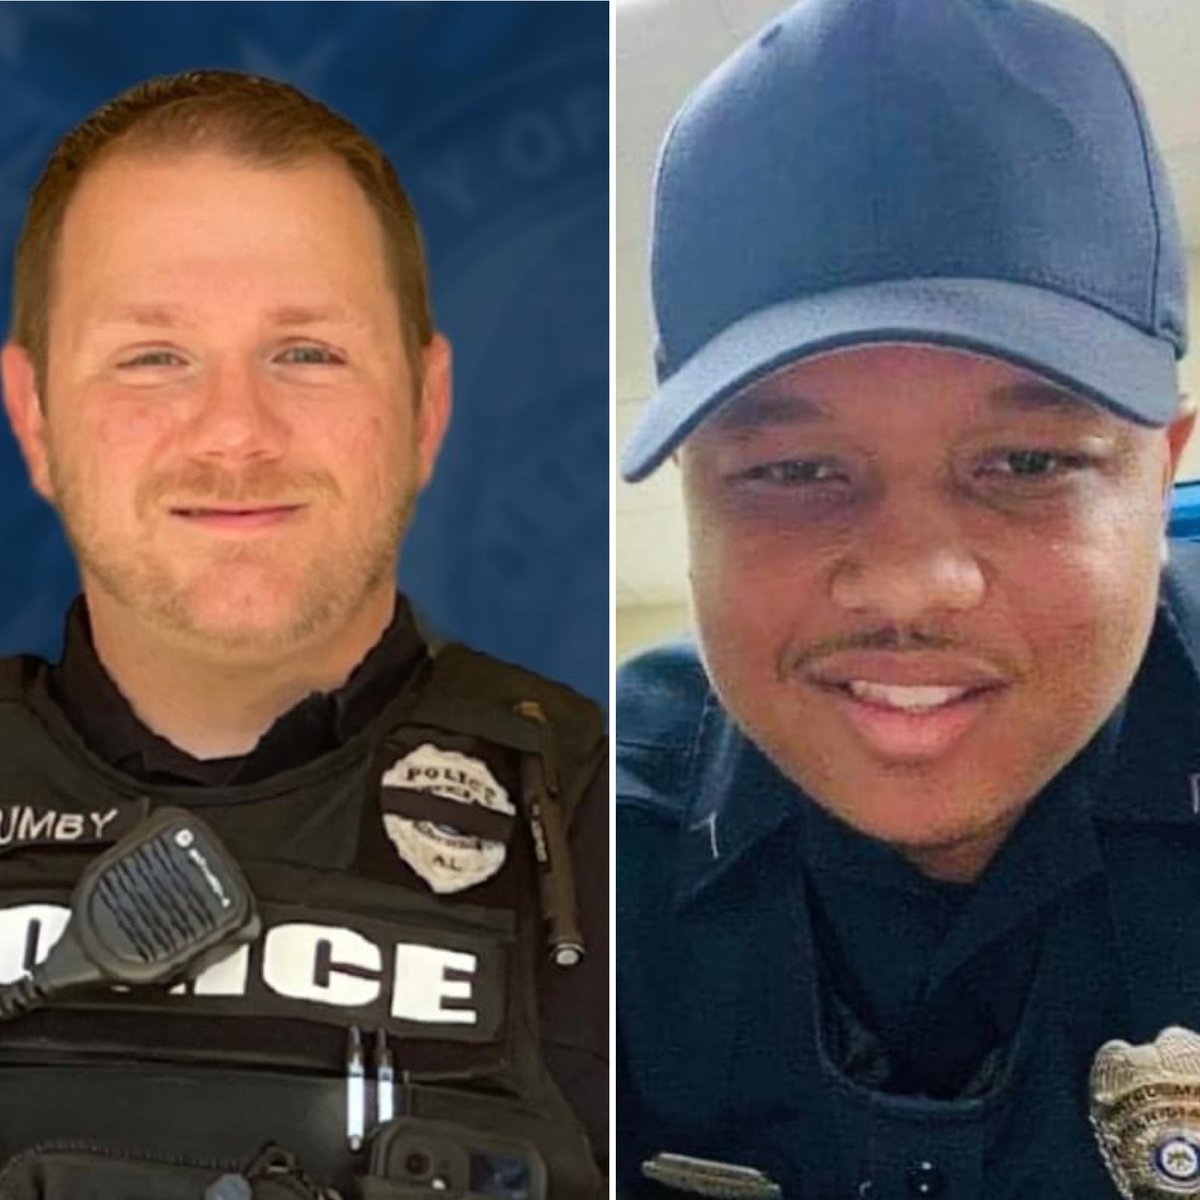 Today, at the FOP Memorial, we honored TPD Officer Trevor Scott Phillips, Investigator Dornell Cousette, Meridian Officer & Tuscaloosa native Kennis Croom, and former TPD Officer Garrett Crumby of Huntsville PD. They made the ultimate sacrifice. May we never forget them.